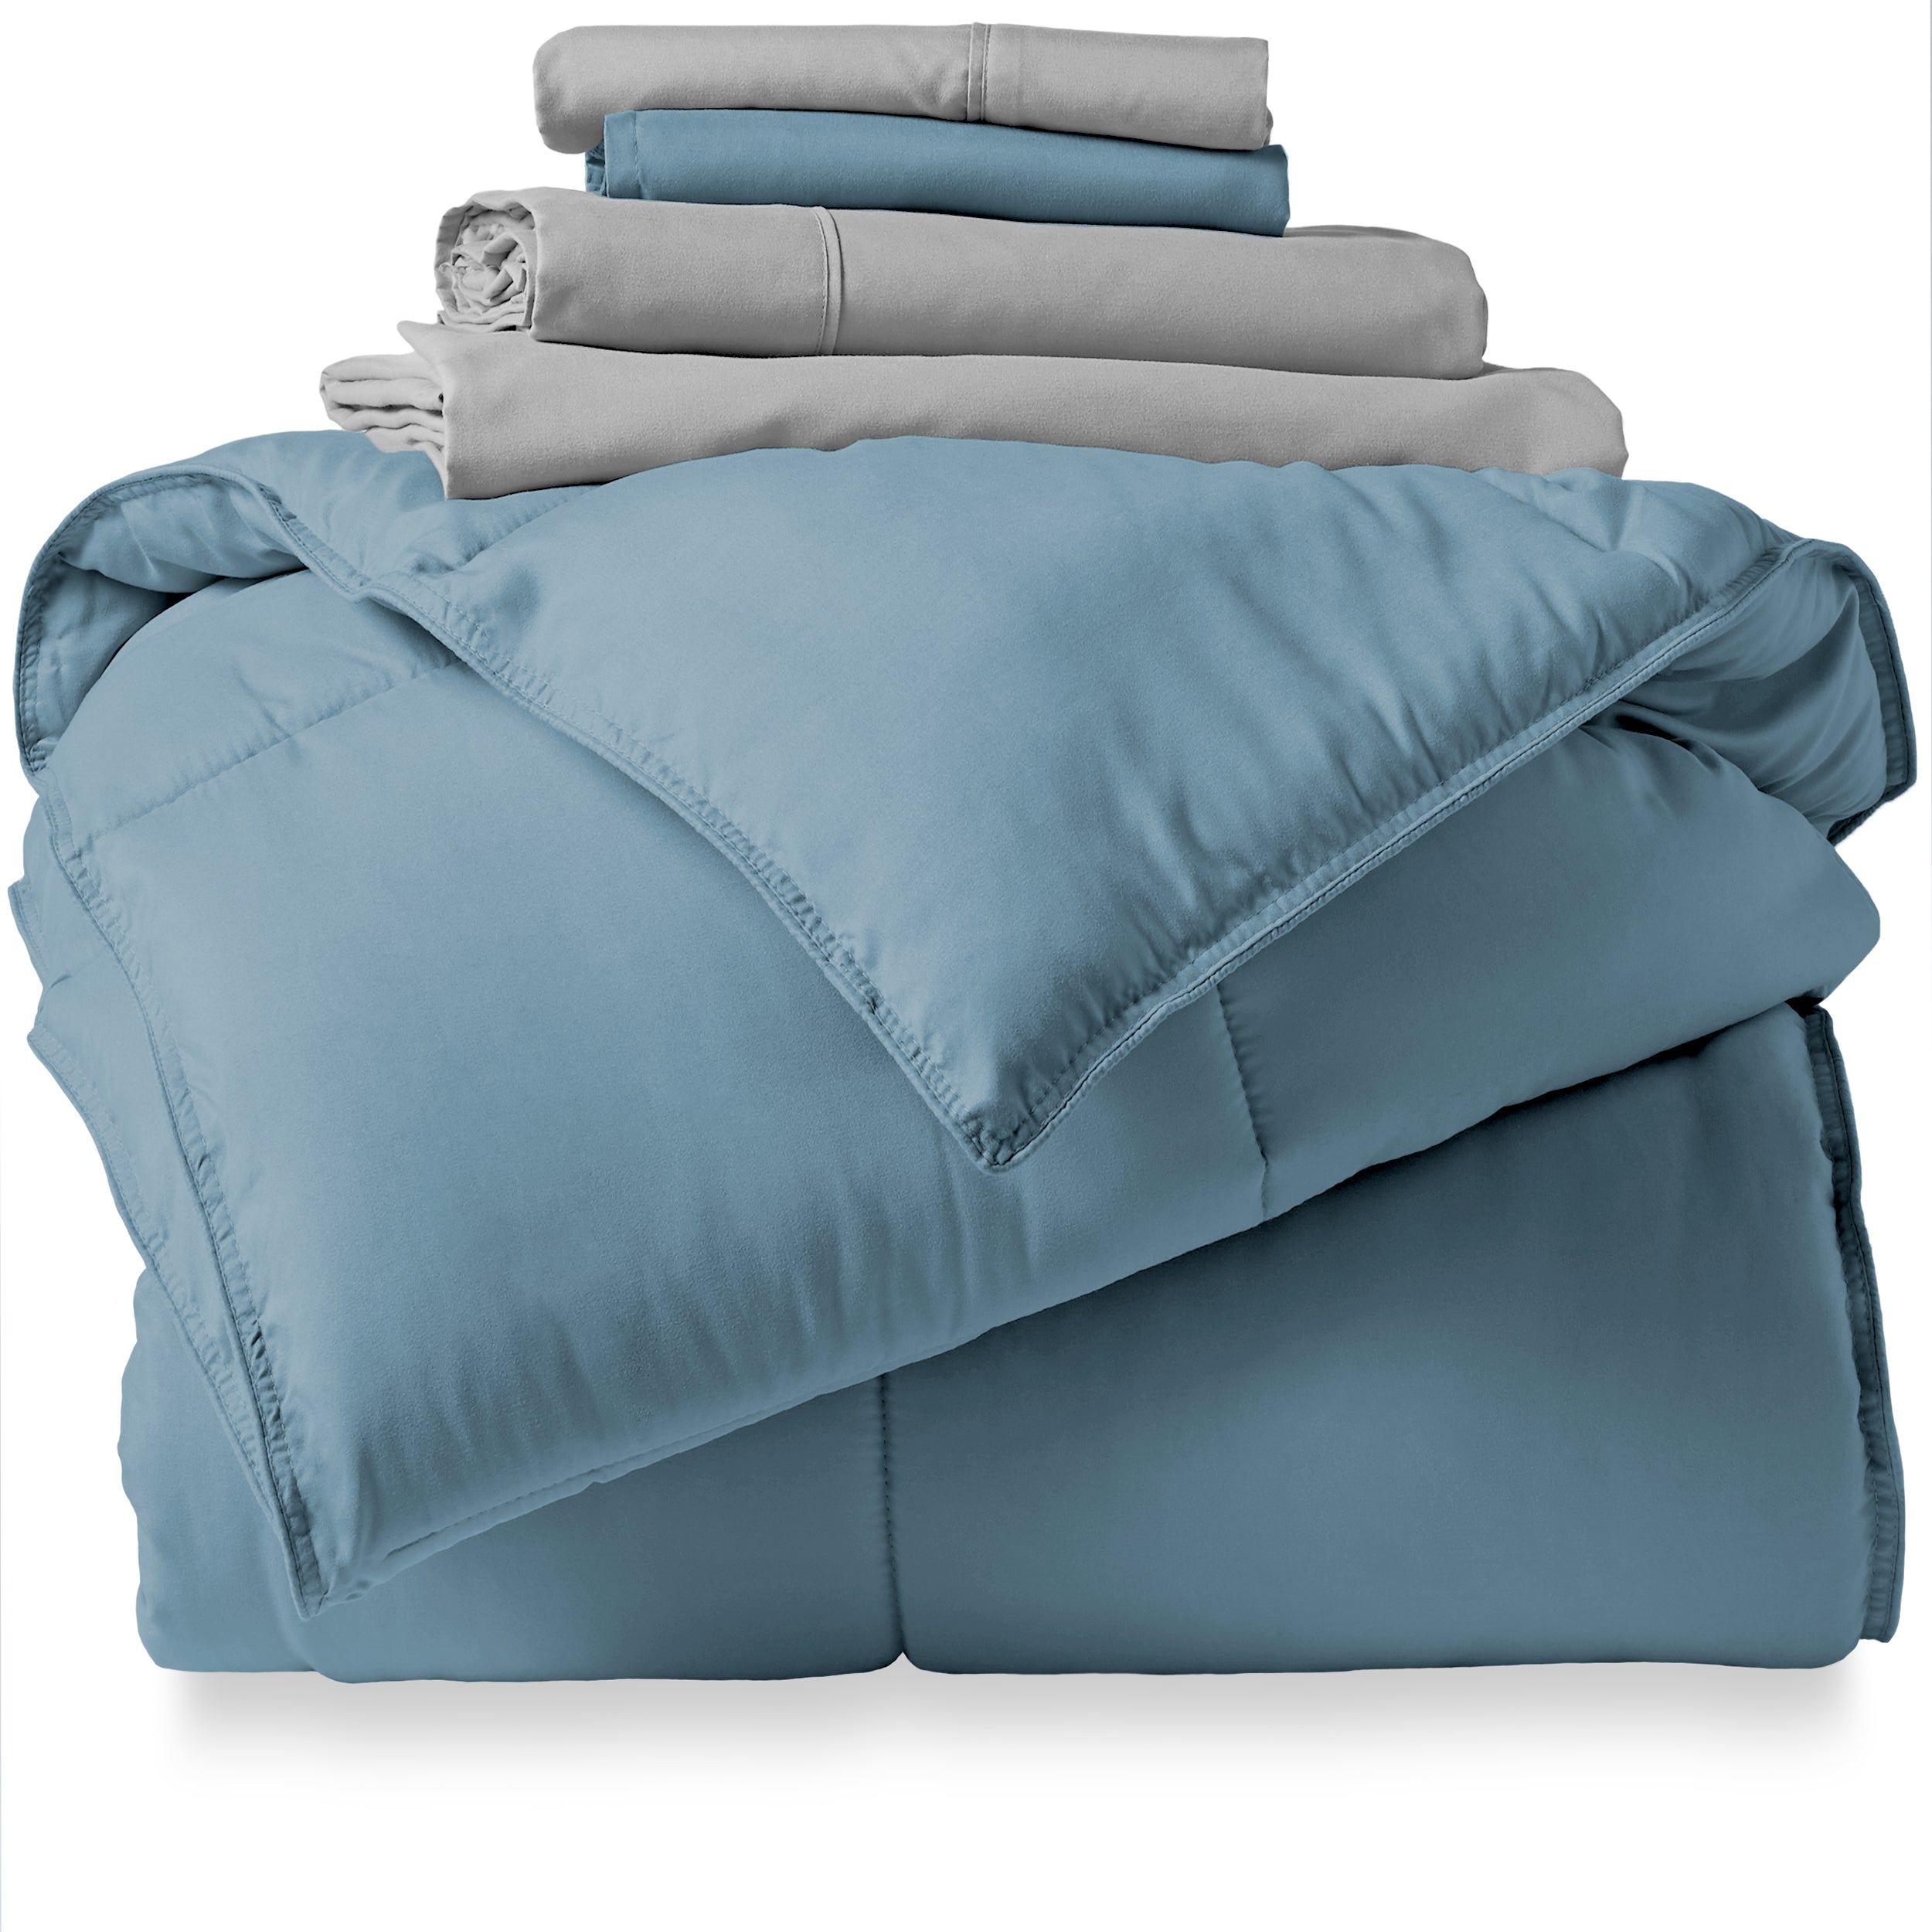 Coronet Blue Comforter Light Grey Sheets Bed-in-a-bag